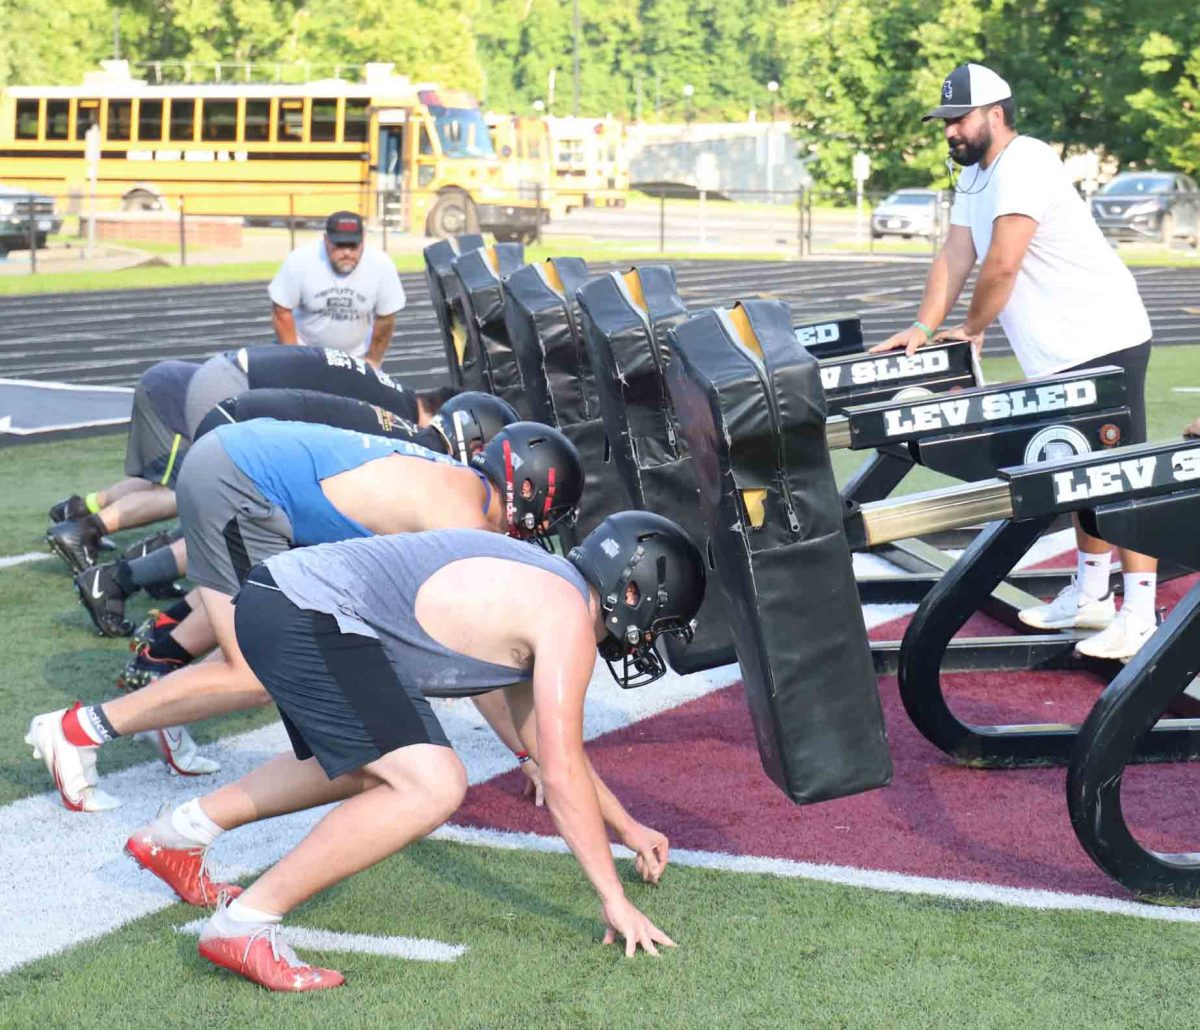 Harlan+County+assistant+coach+Scotty+Bailey+led+a+sled+drill+during+a+recent+practice+session.+Harlan+County+will+open+its+season+Aug.+19+at+Middlesboro.